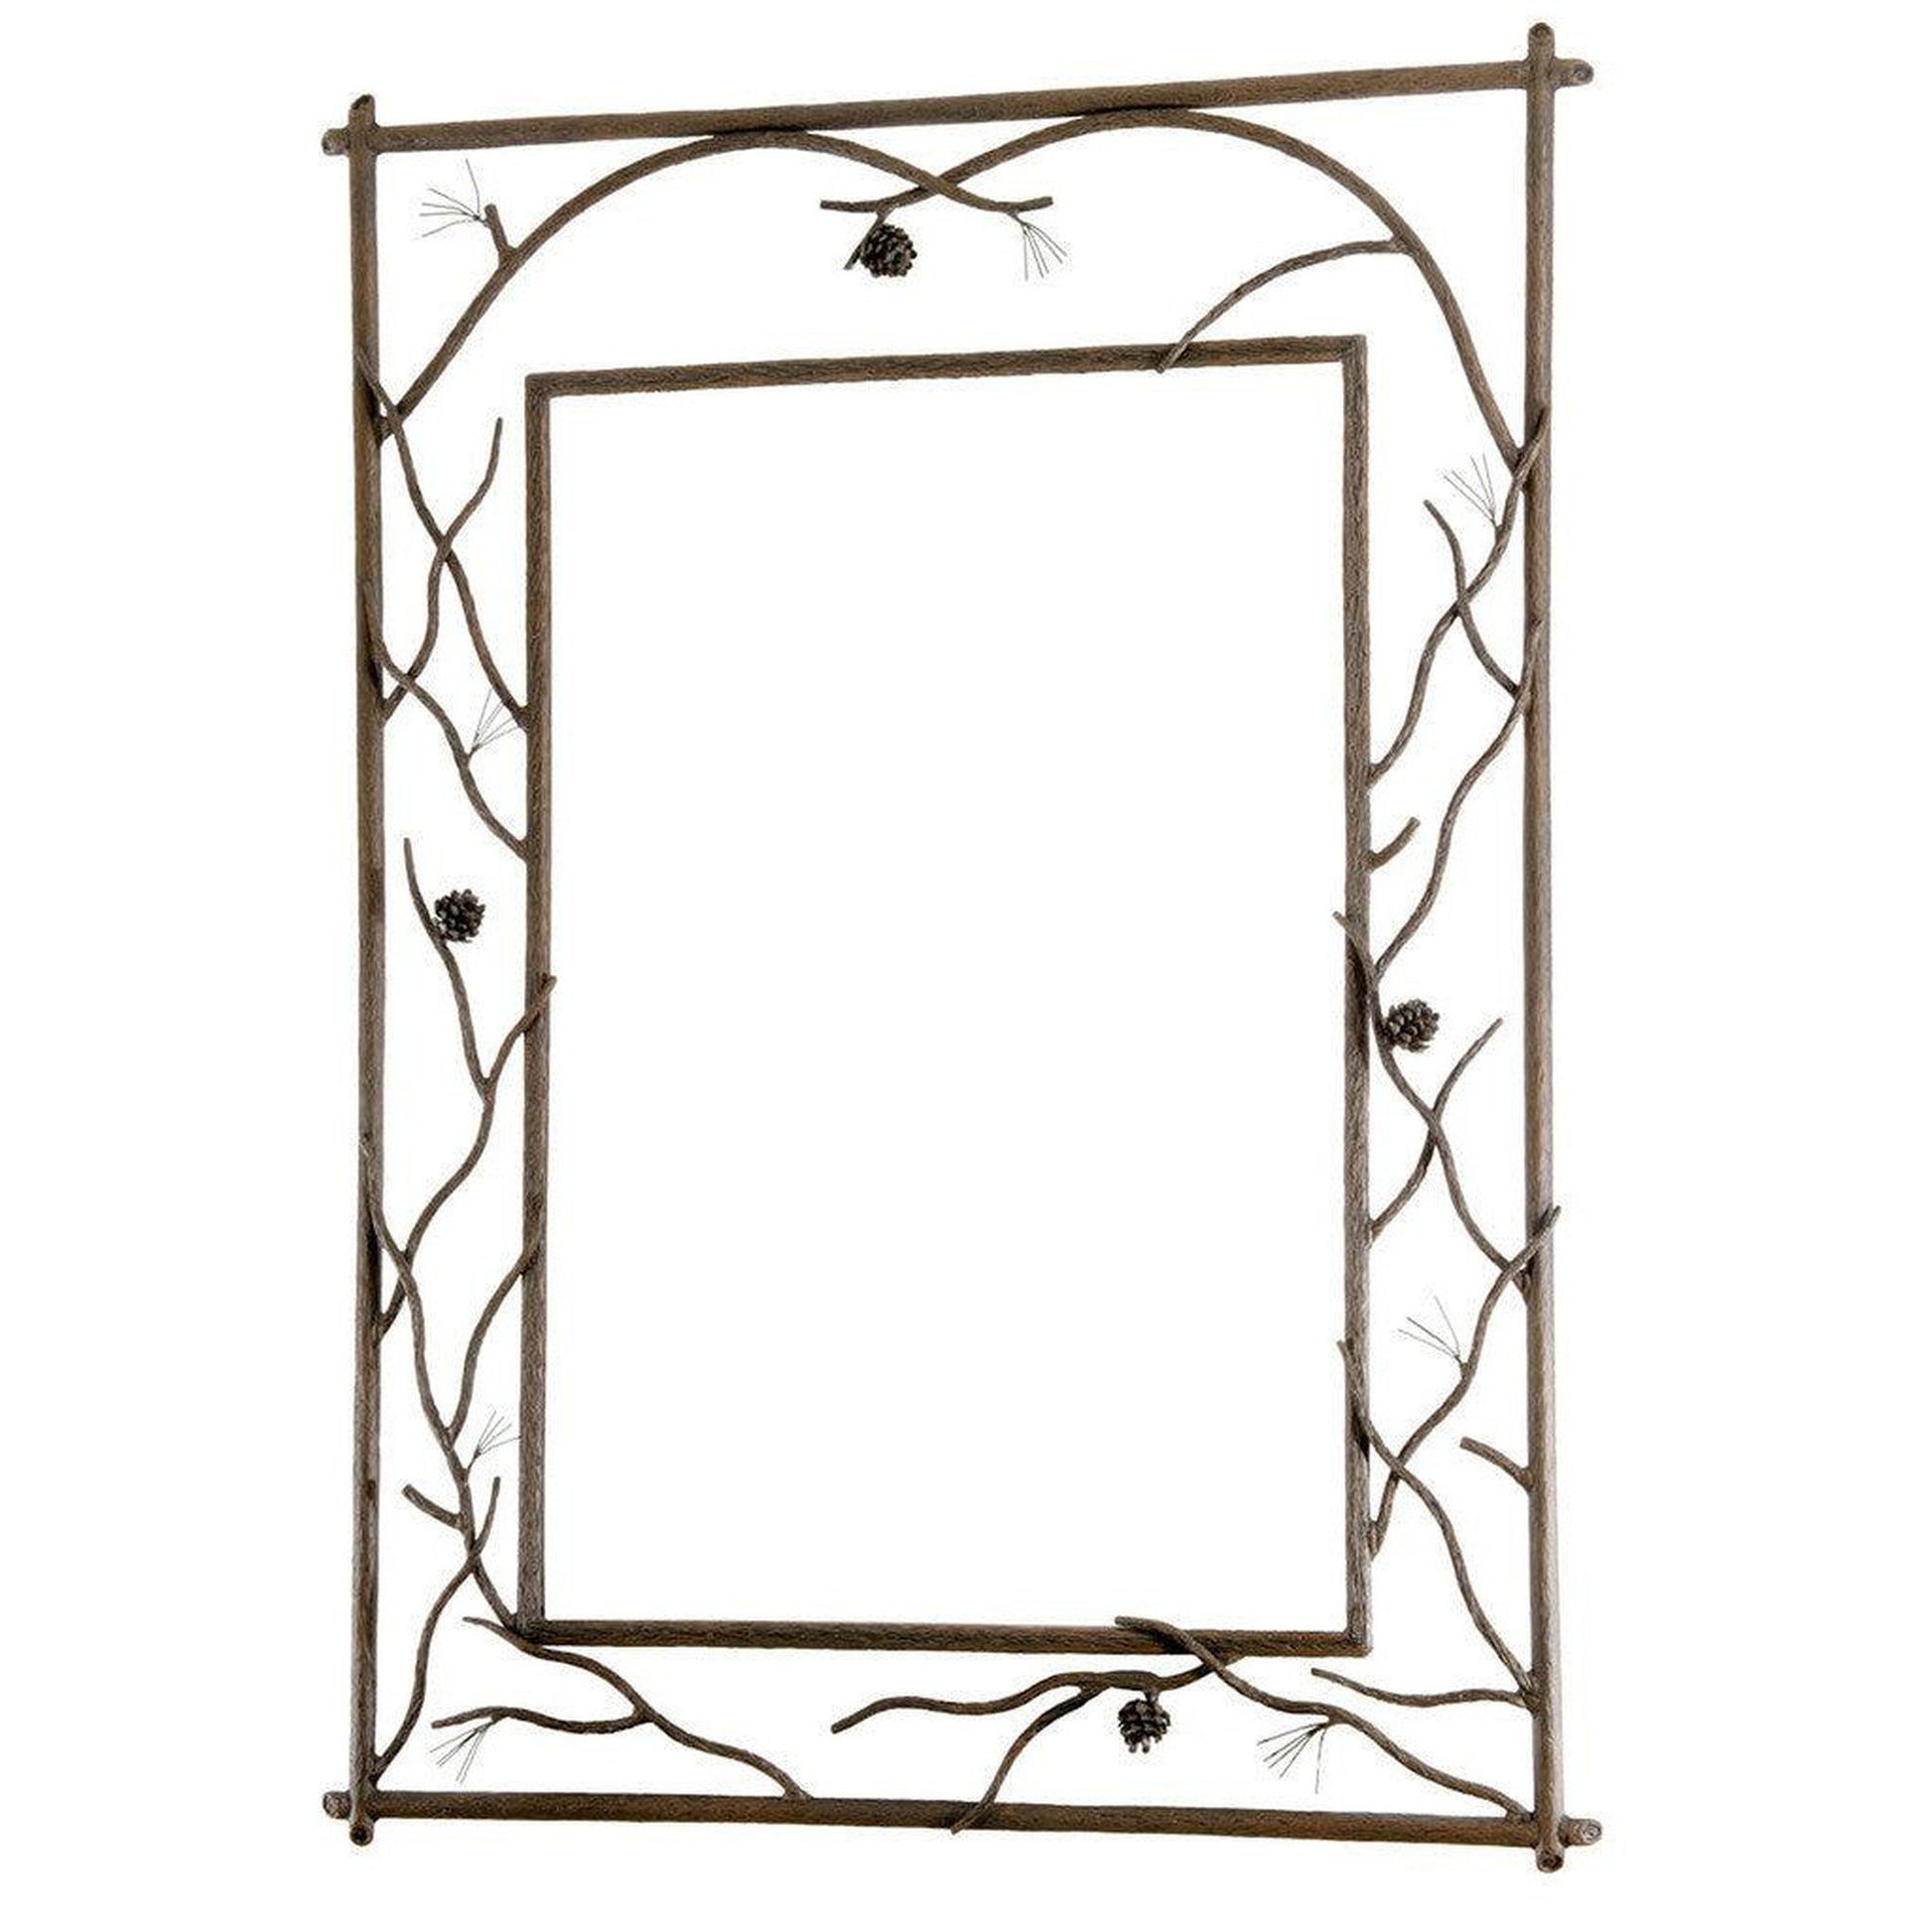 Stone County Ironworks Pine 29" x 35" Small Natural Bark Branched Iron Wall Mirror